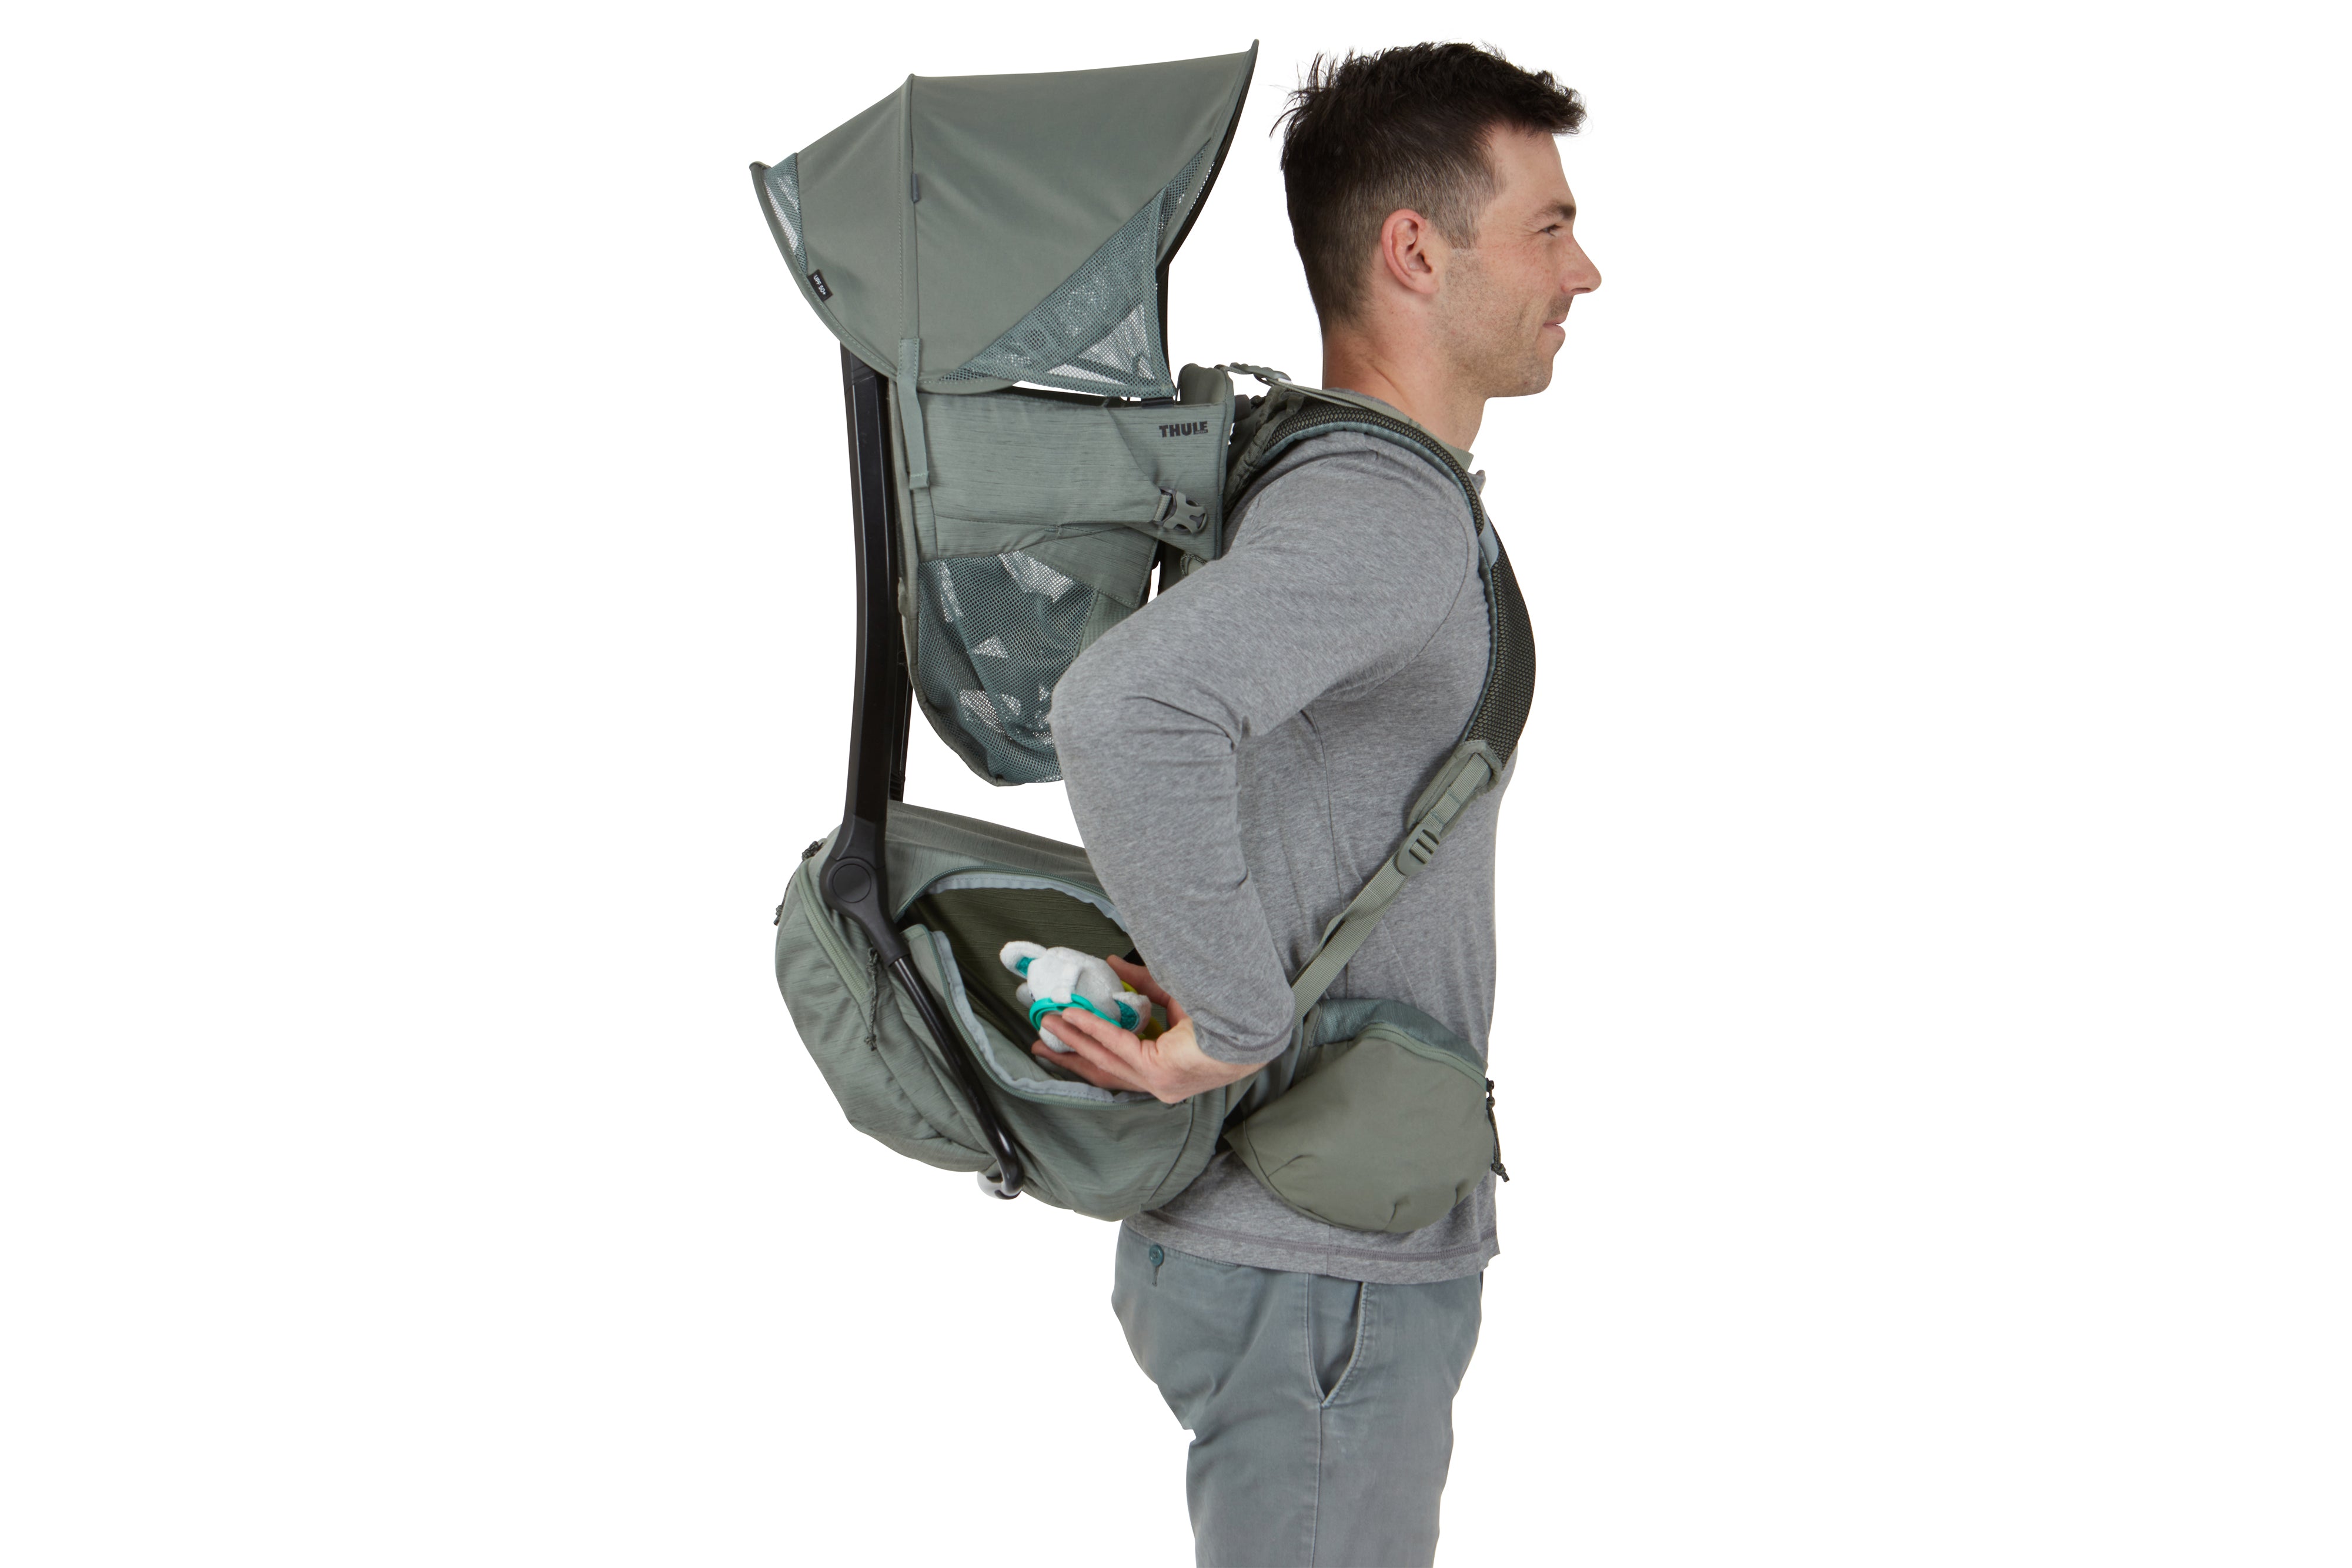 man carrying child carrier backpack and keeping baby toy in extra storage zipper compartment